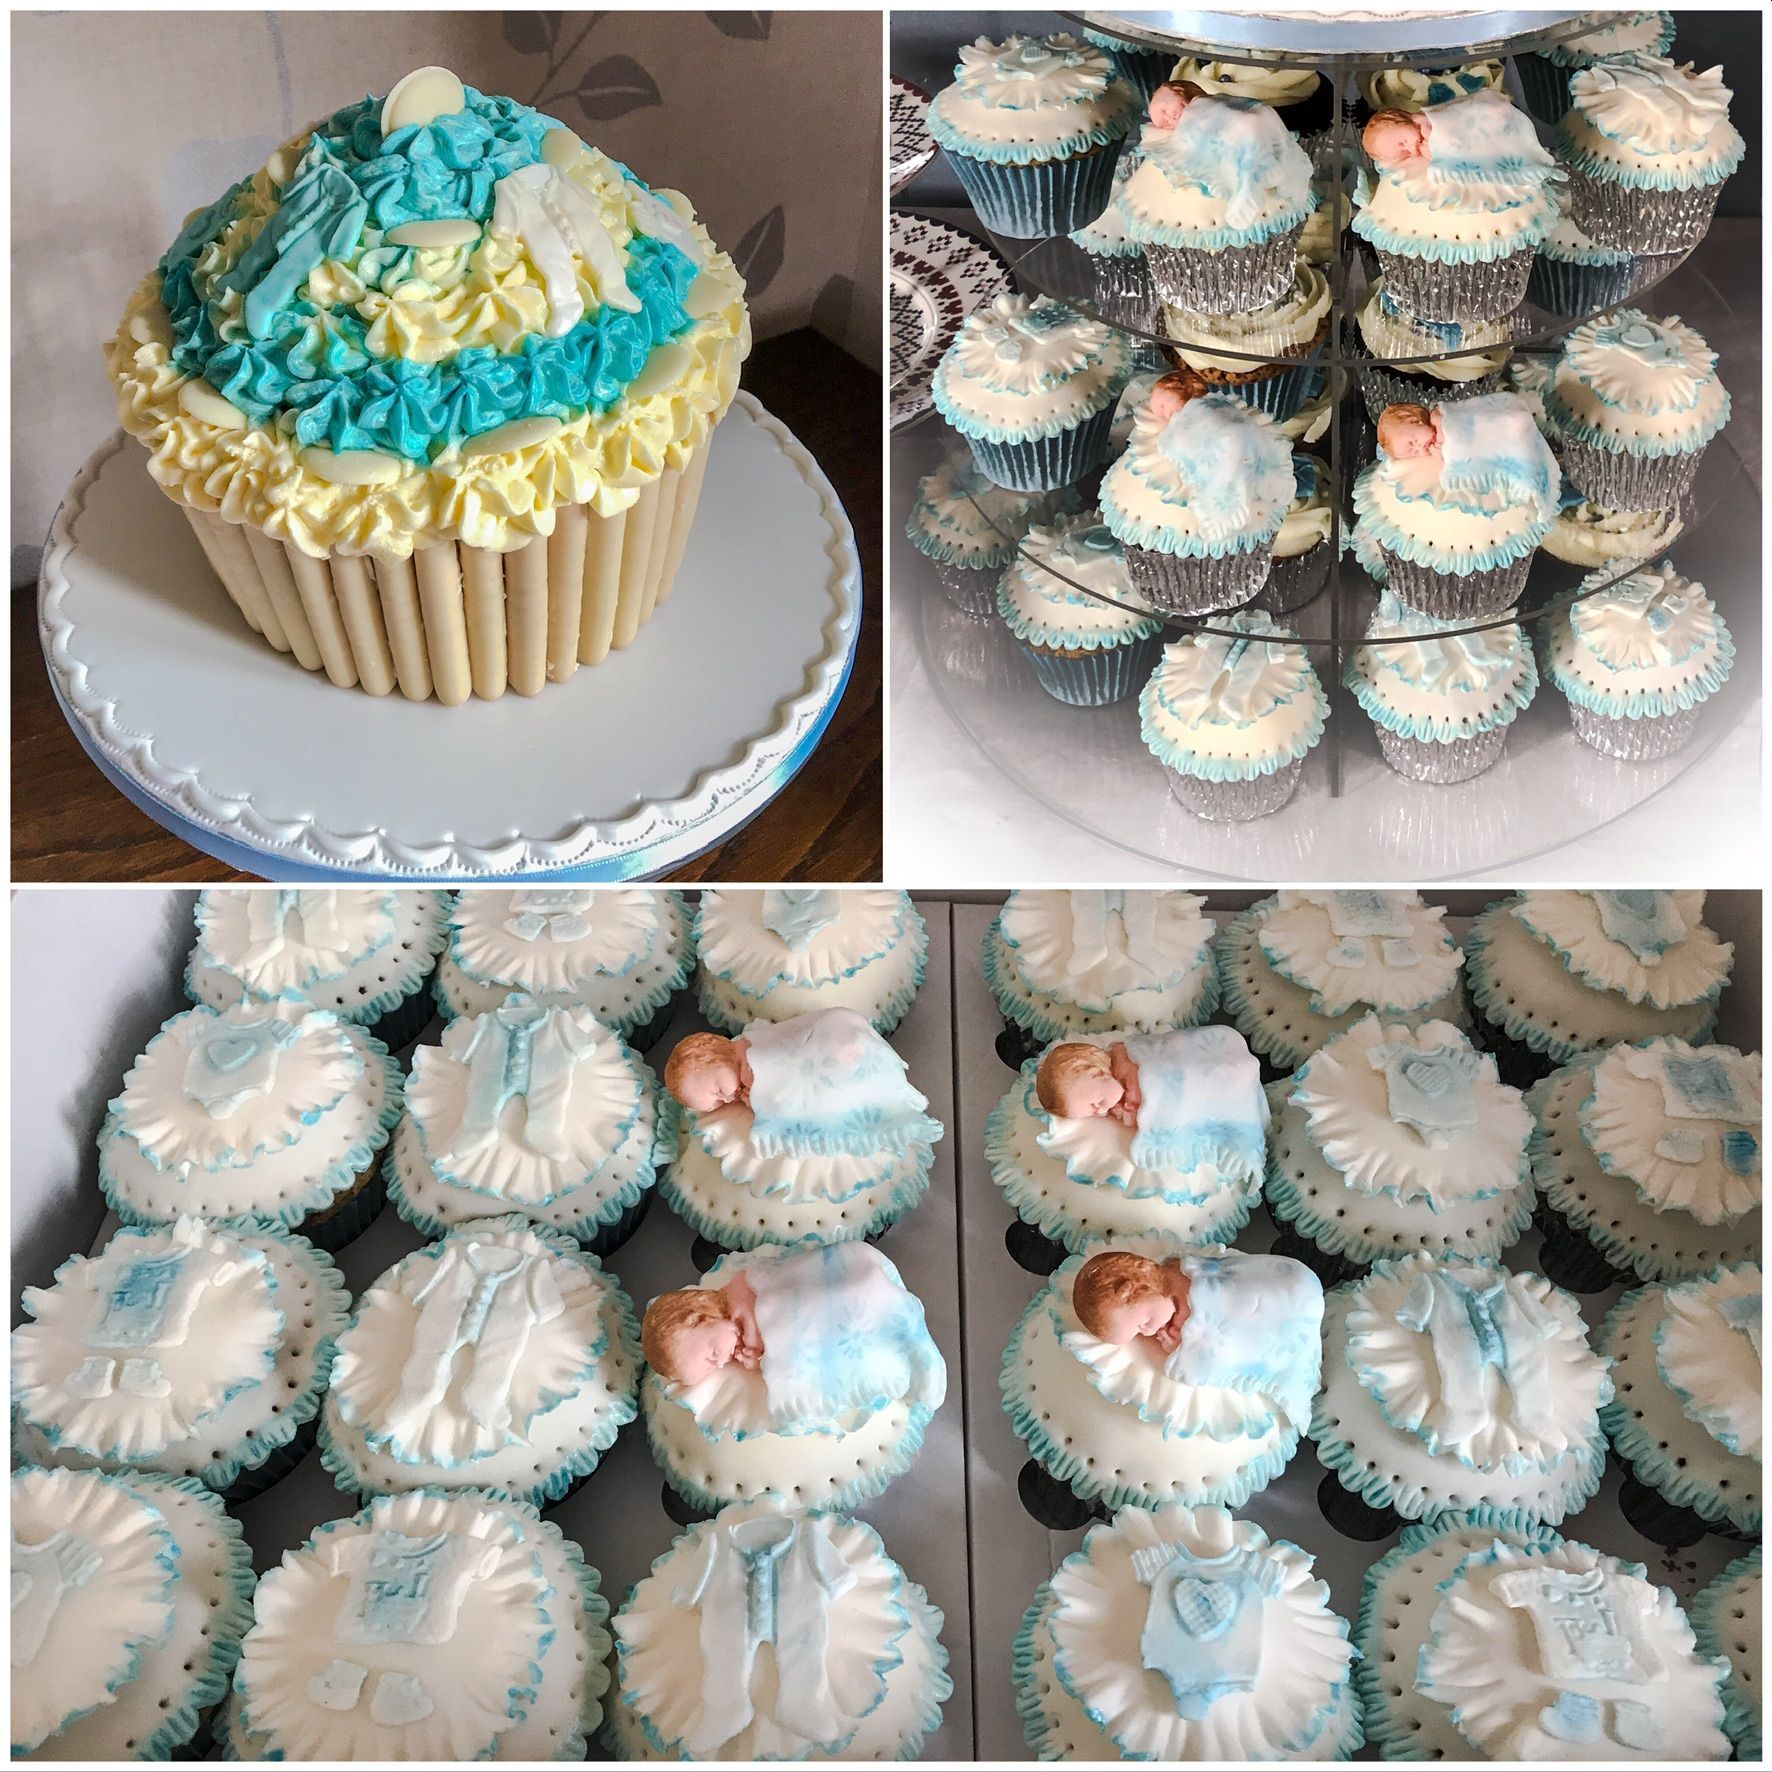 giant cupcake and babyshower cupcakes